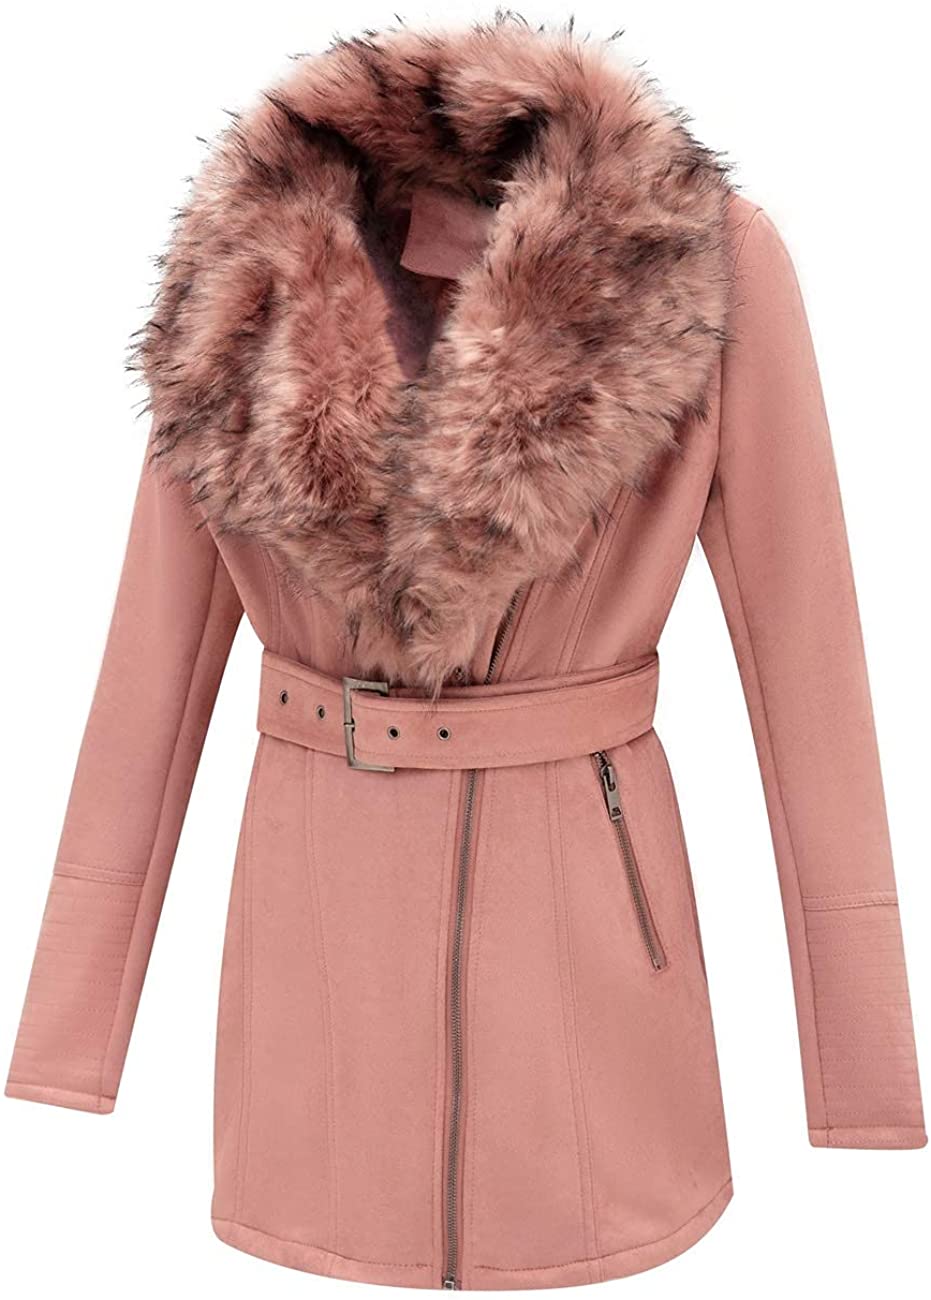 Shearling Parka Pink Coat with Fur Collar Winter Fashion for Women